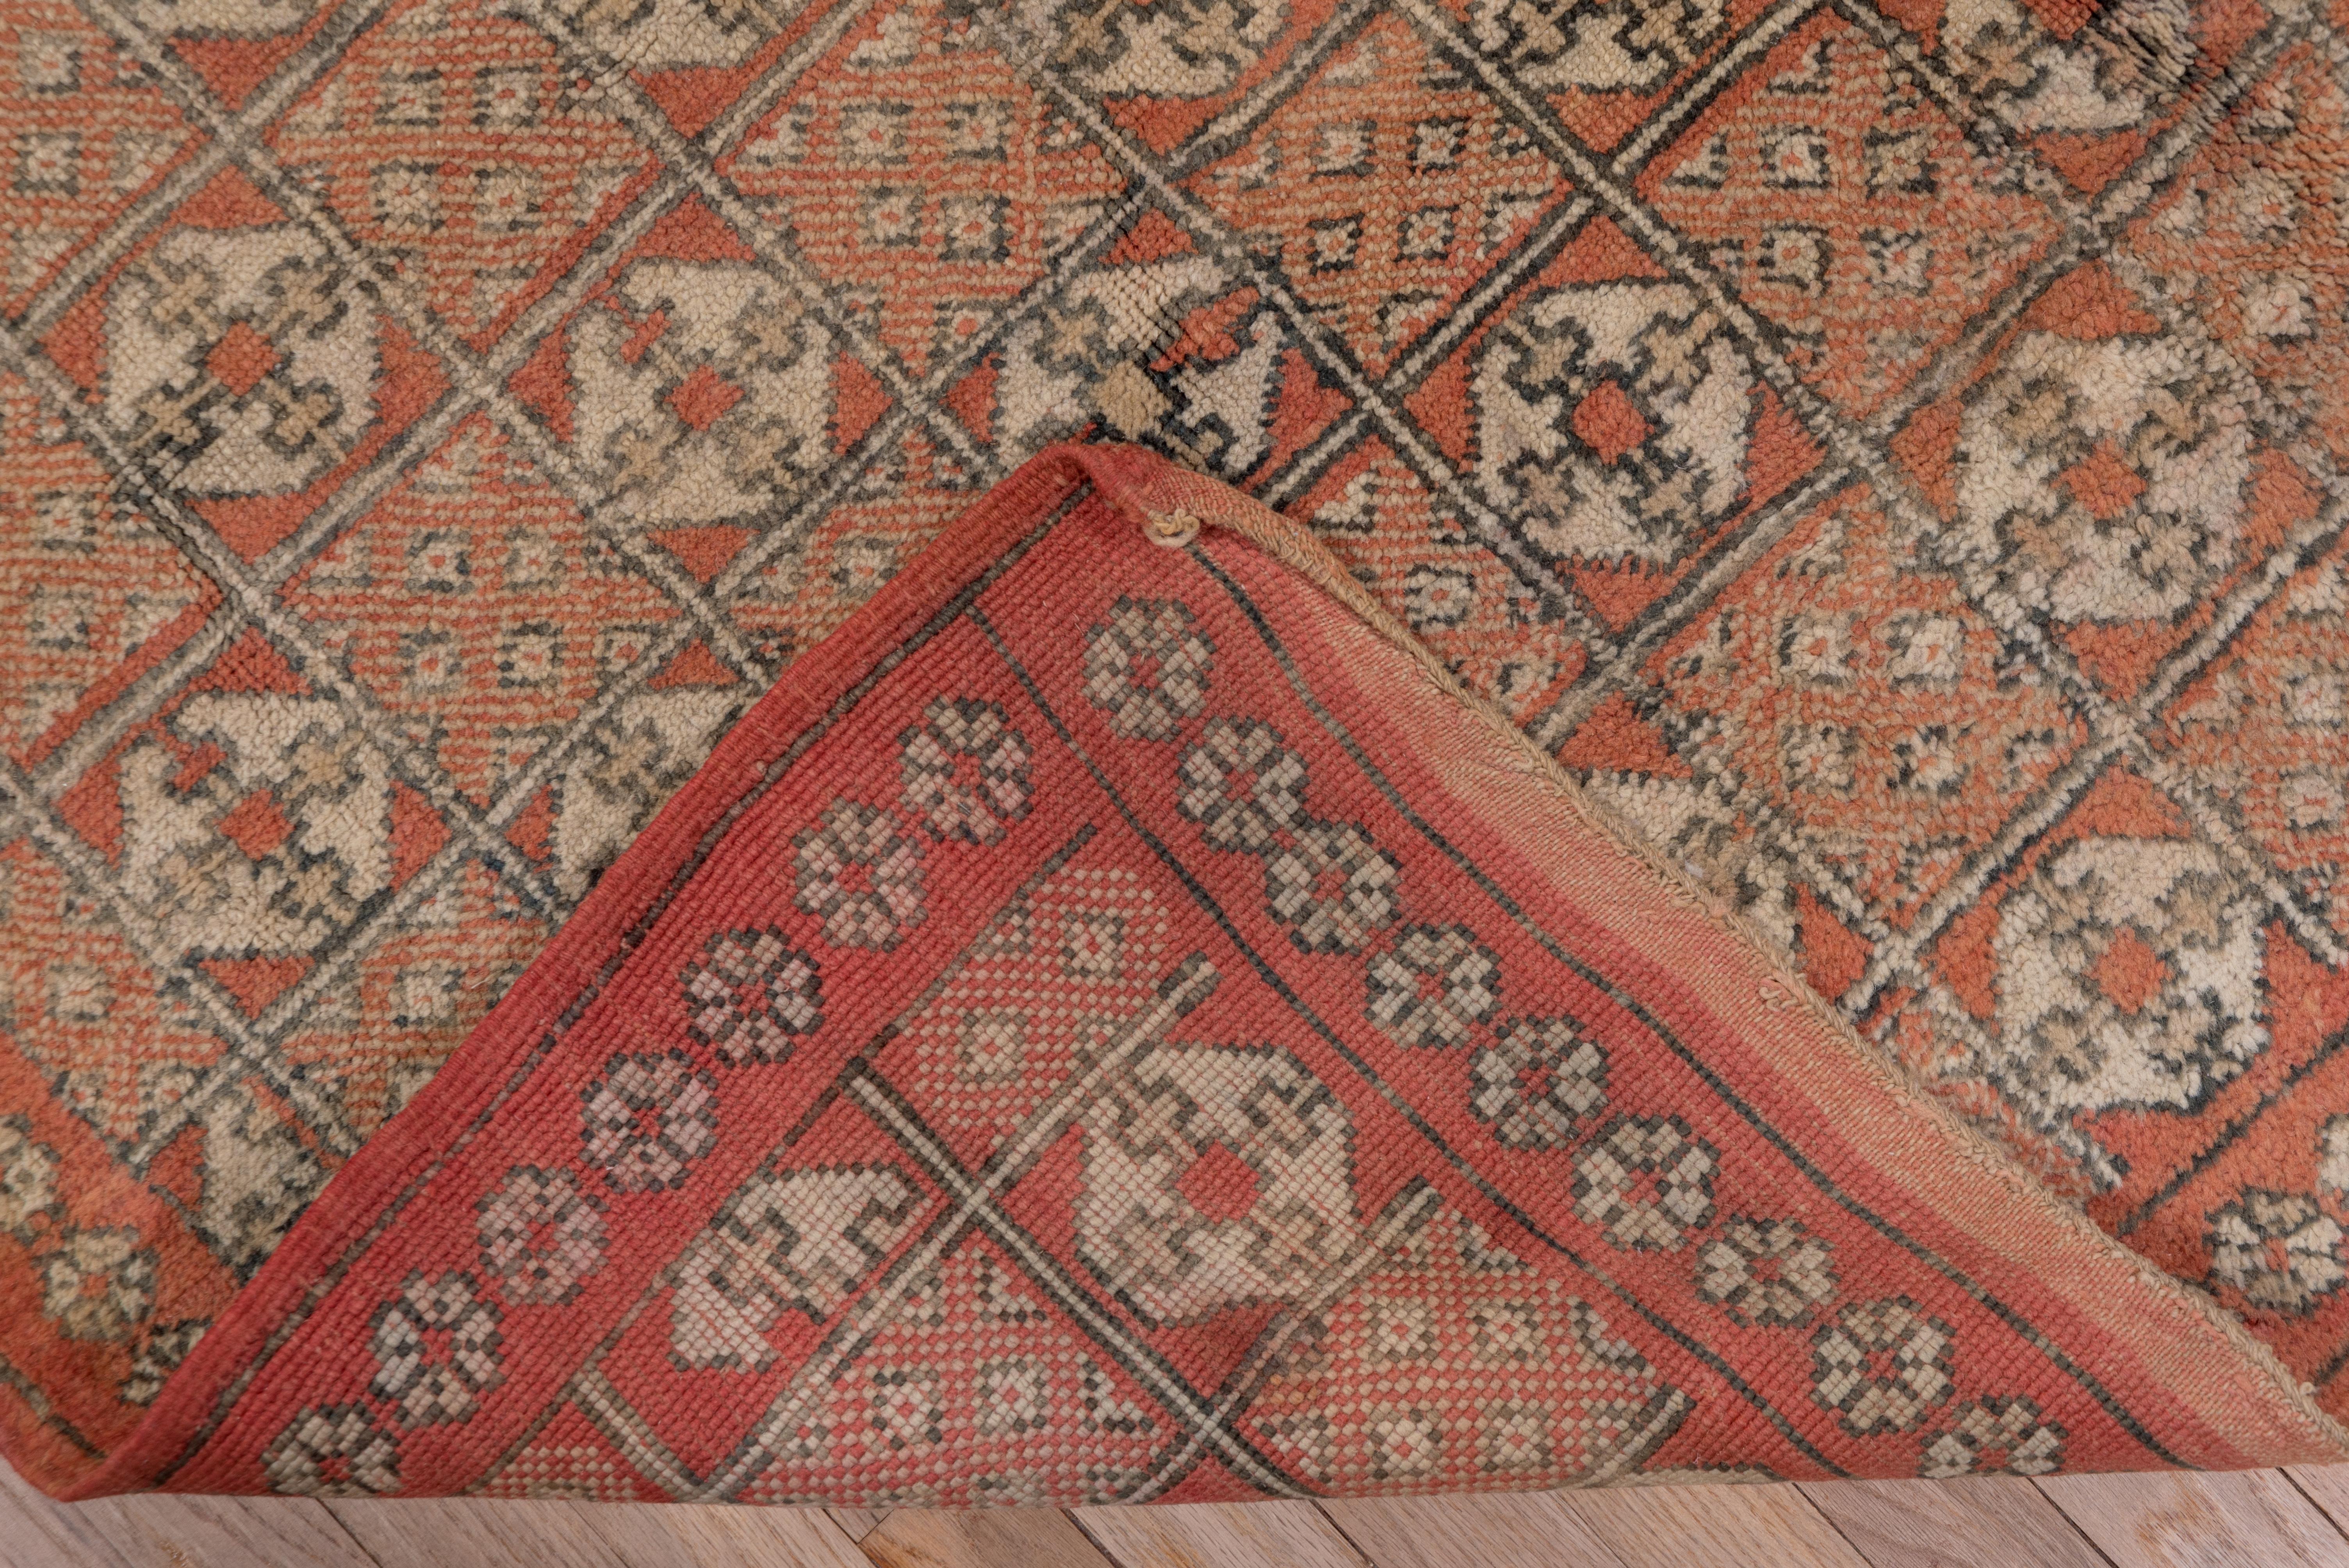 Hand-Knotted Vintage Red Moroccan Carpet